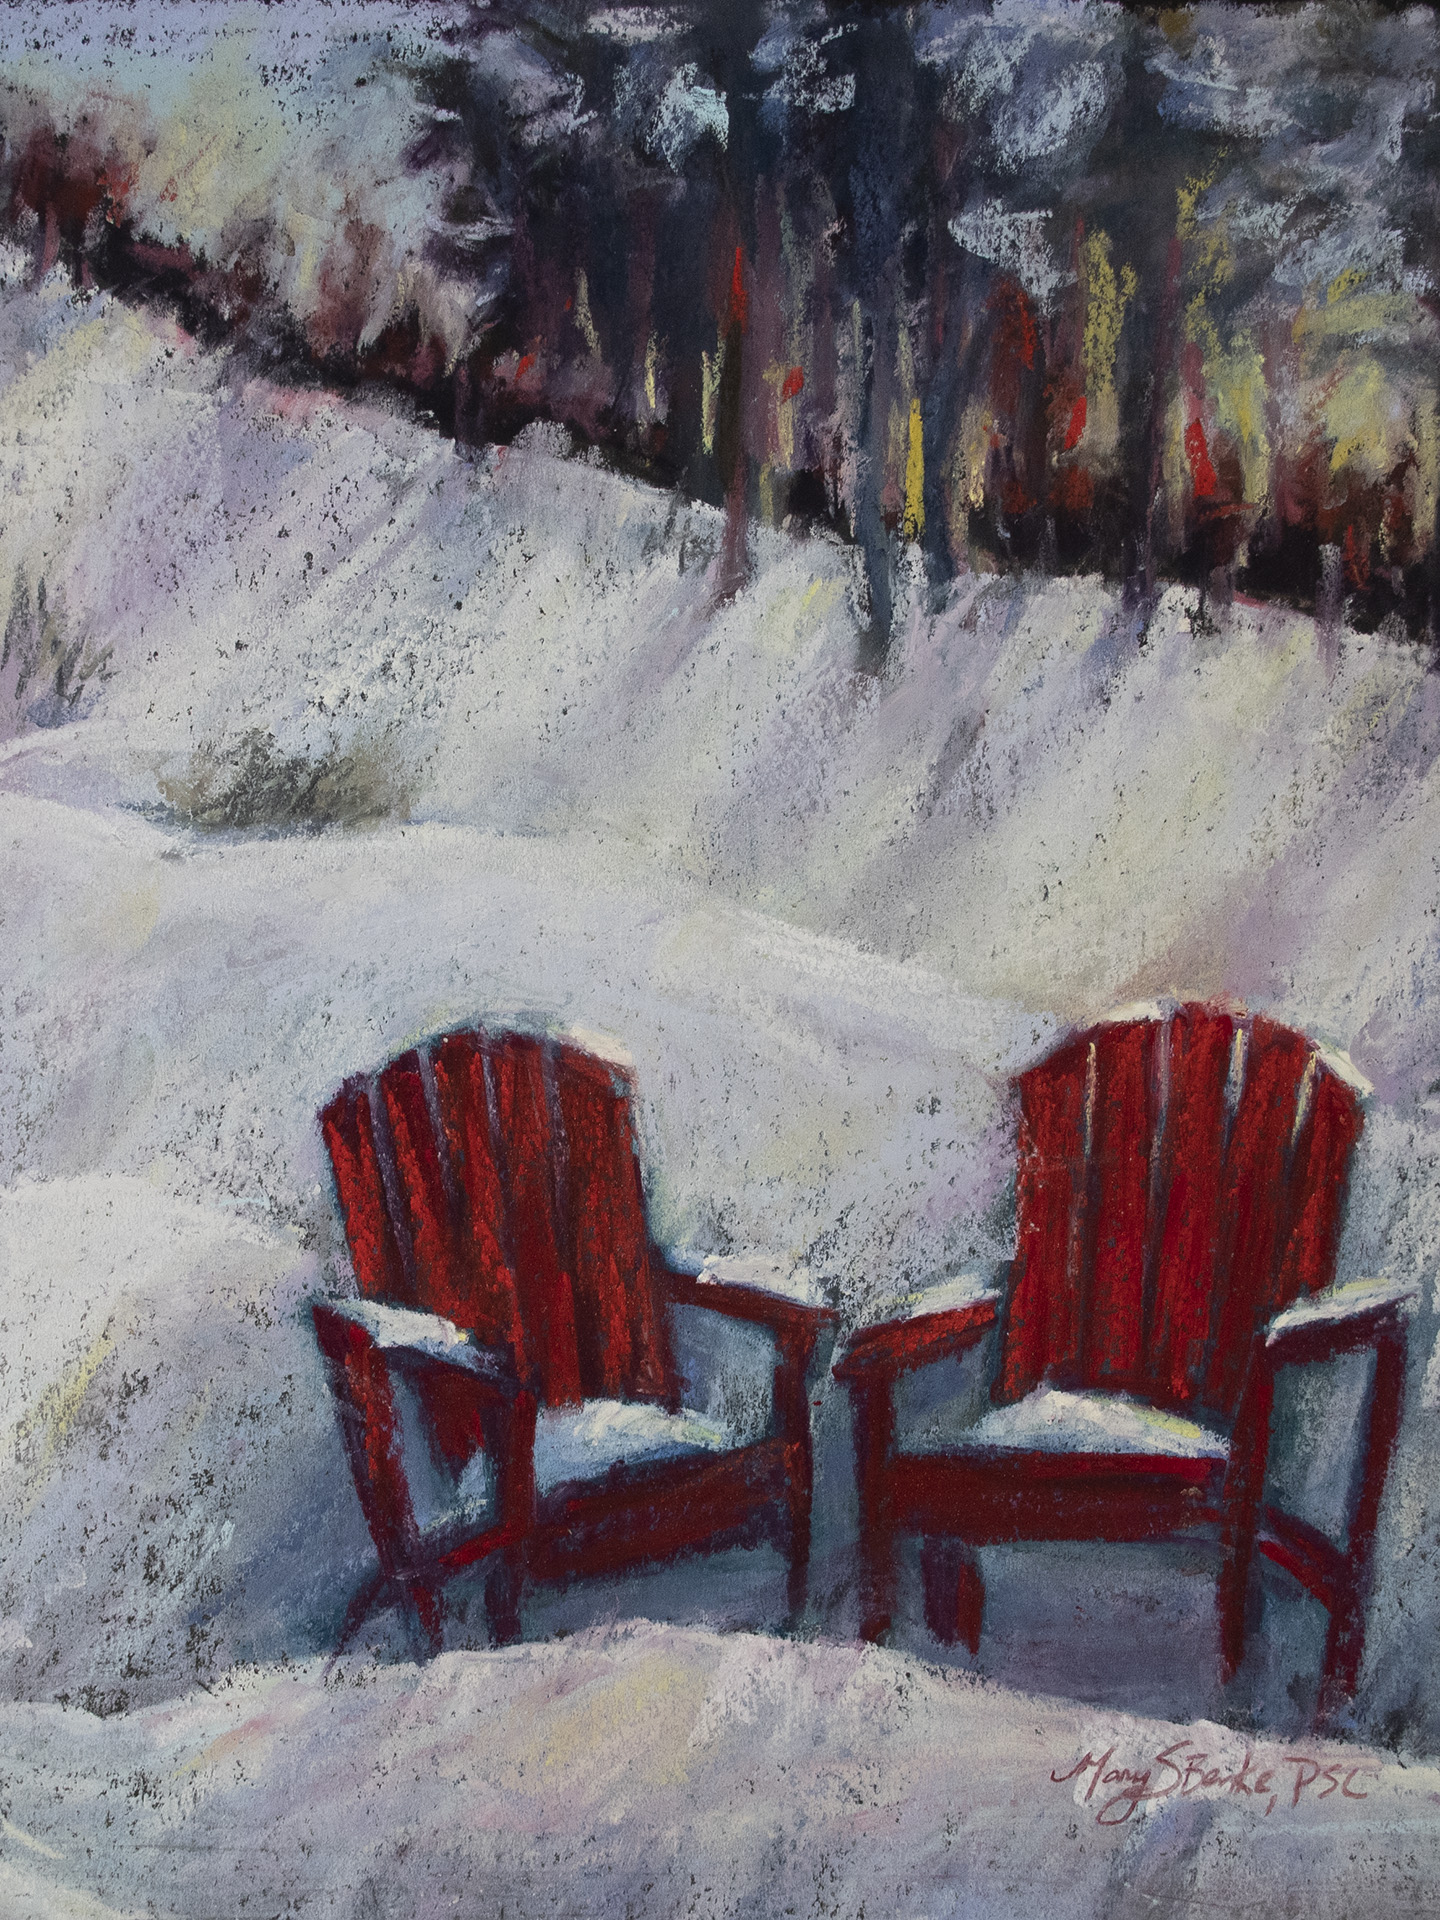 Spring pastel landscape painting with adirondack chairs waiting in the snow by Mary Benke